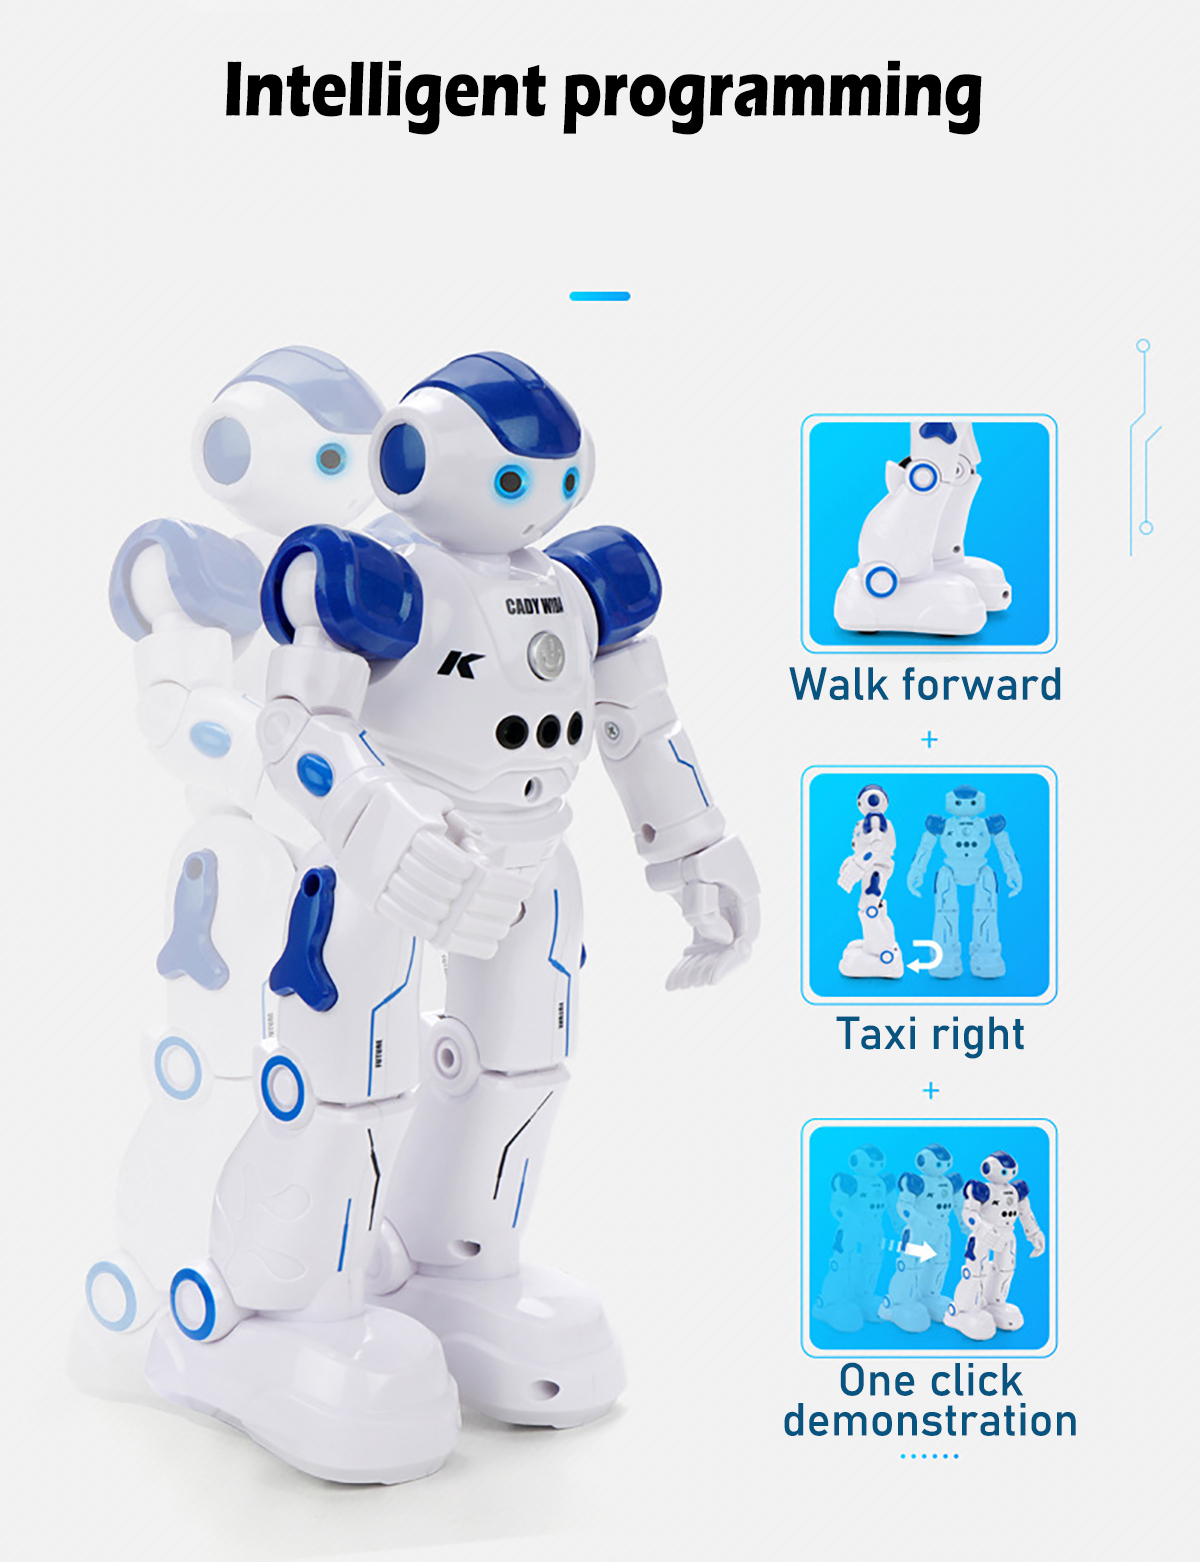 JJRC-R2S-Remote-Control-Programming-Gesture-Induction-Dancing-Robot-1887329-14